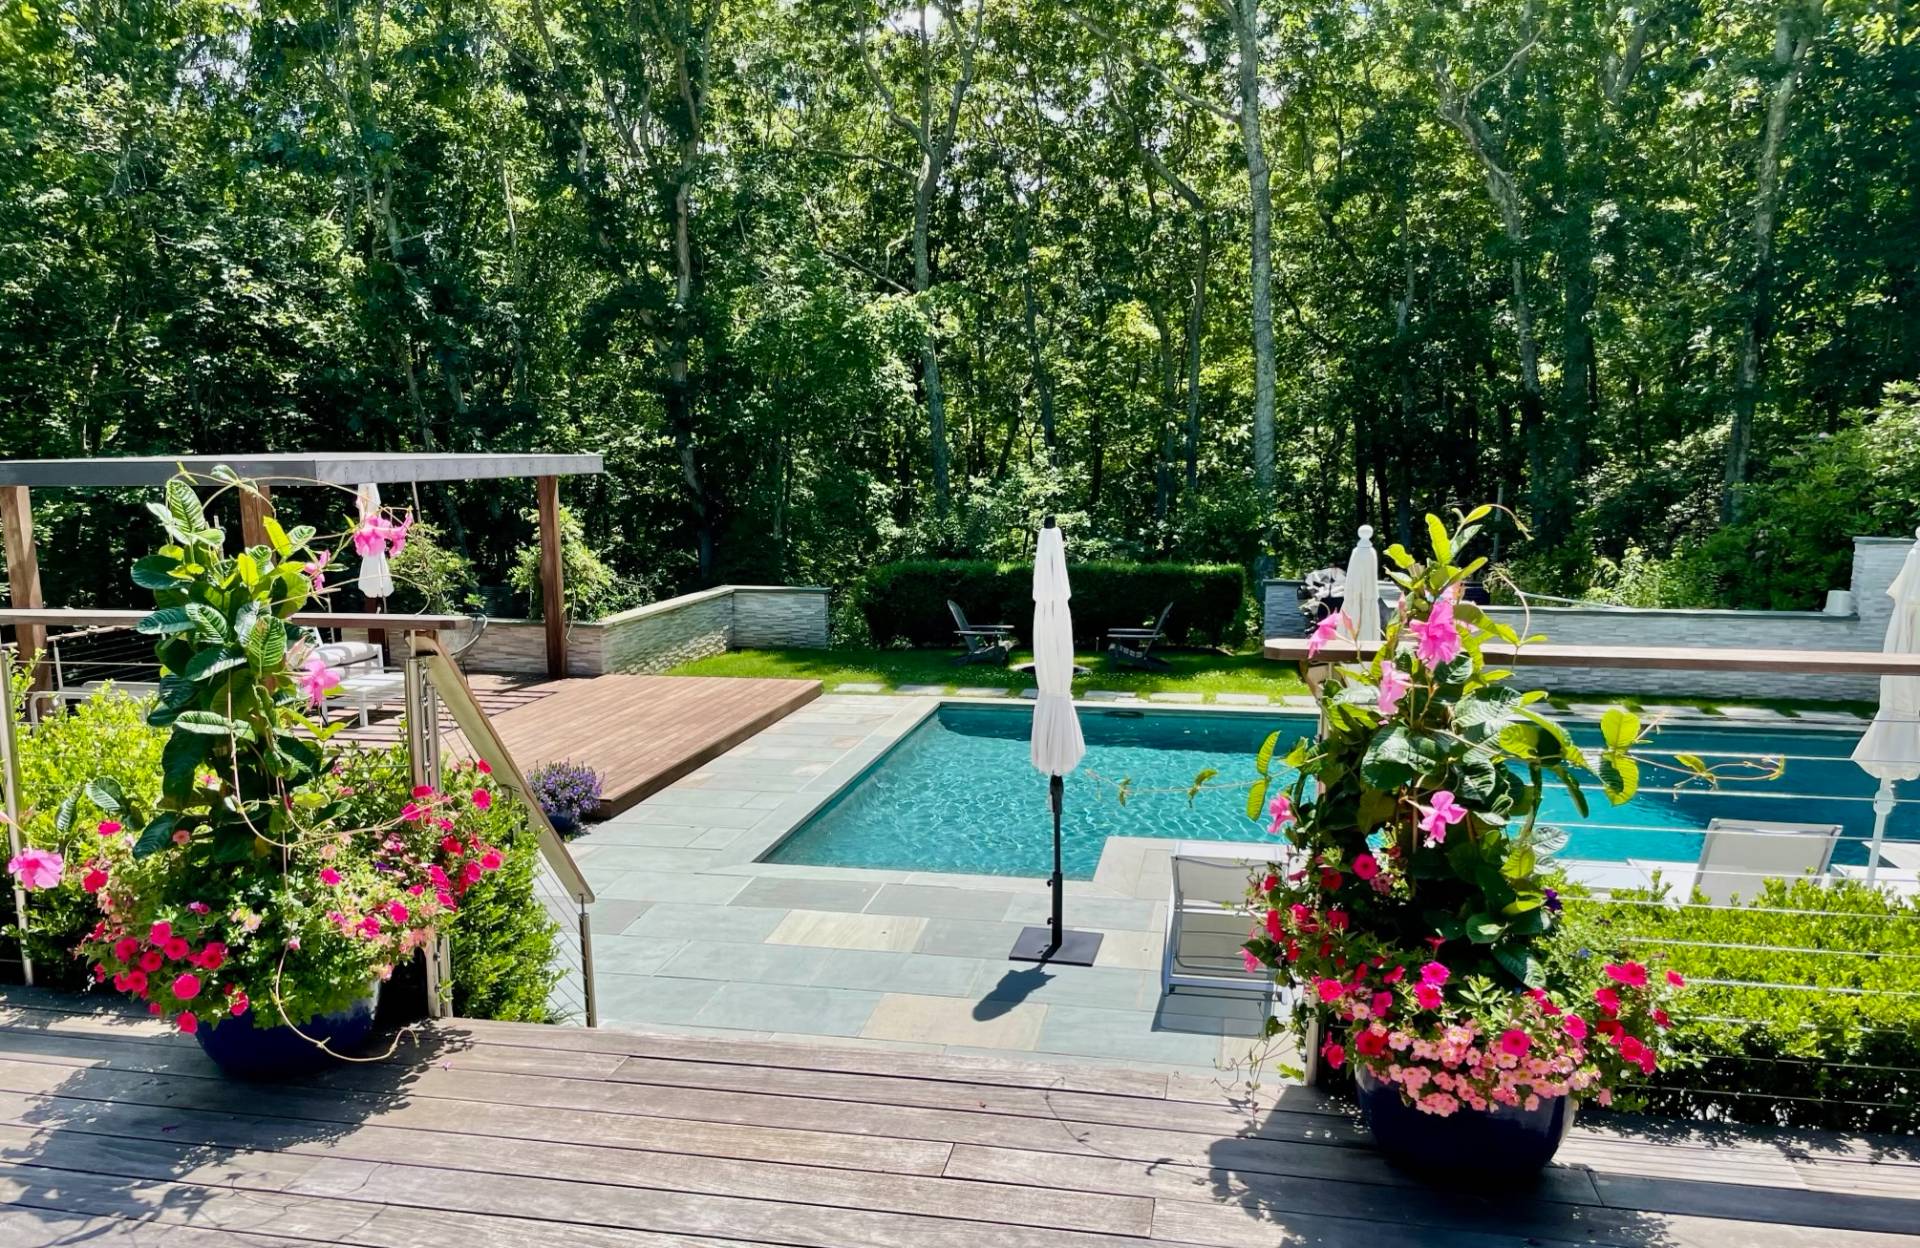 a view of a backyard with plants and fountain